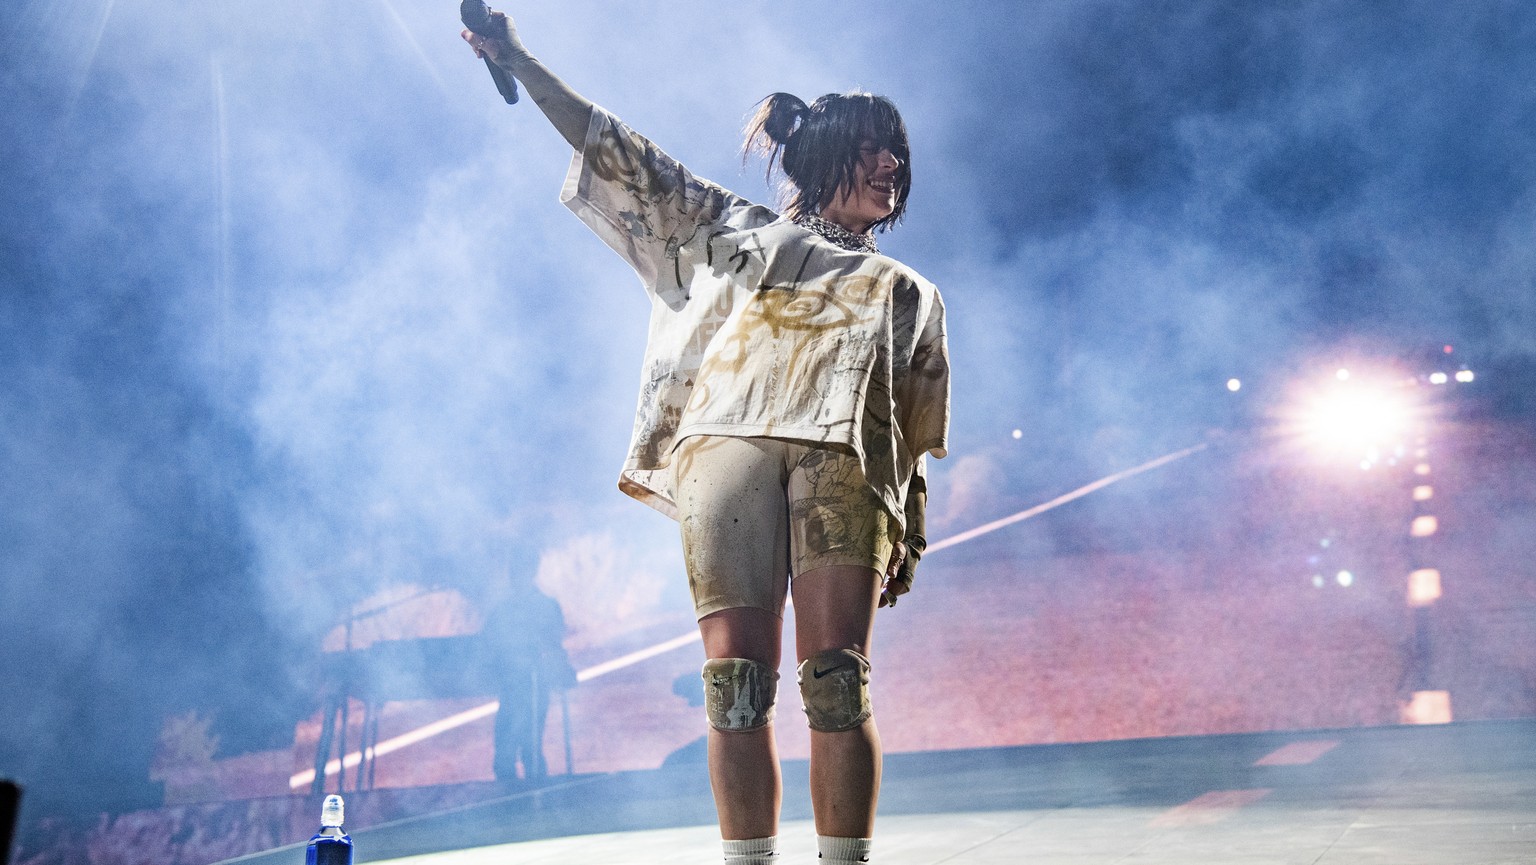 Billie Eilish performs at the Coachella Music &amp; Arts Festival at the Empire Polo Club on Saturday, April 16, 2022, in Indio, Calif. (Photo by Amy Harris/Invision/AP)
Billie Eilish